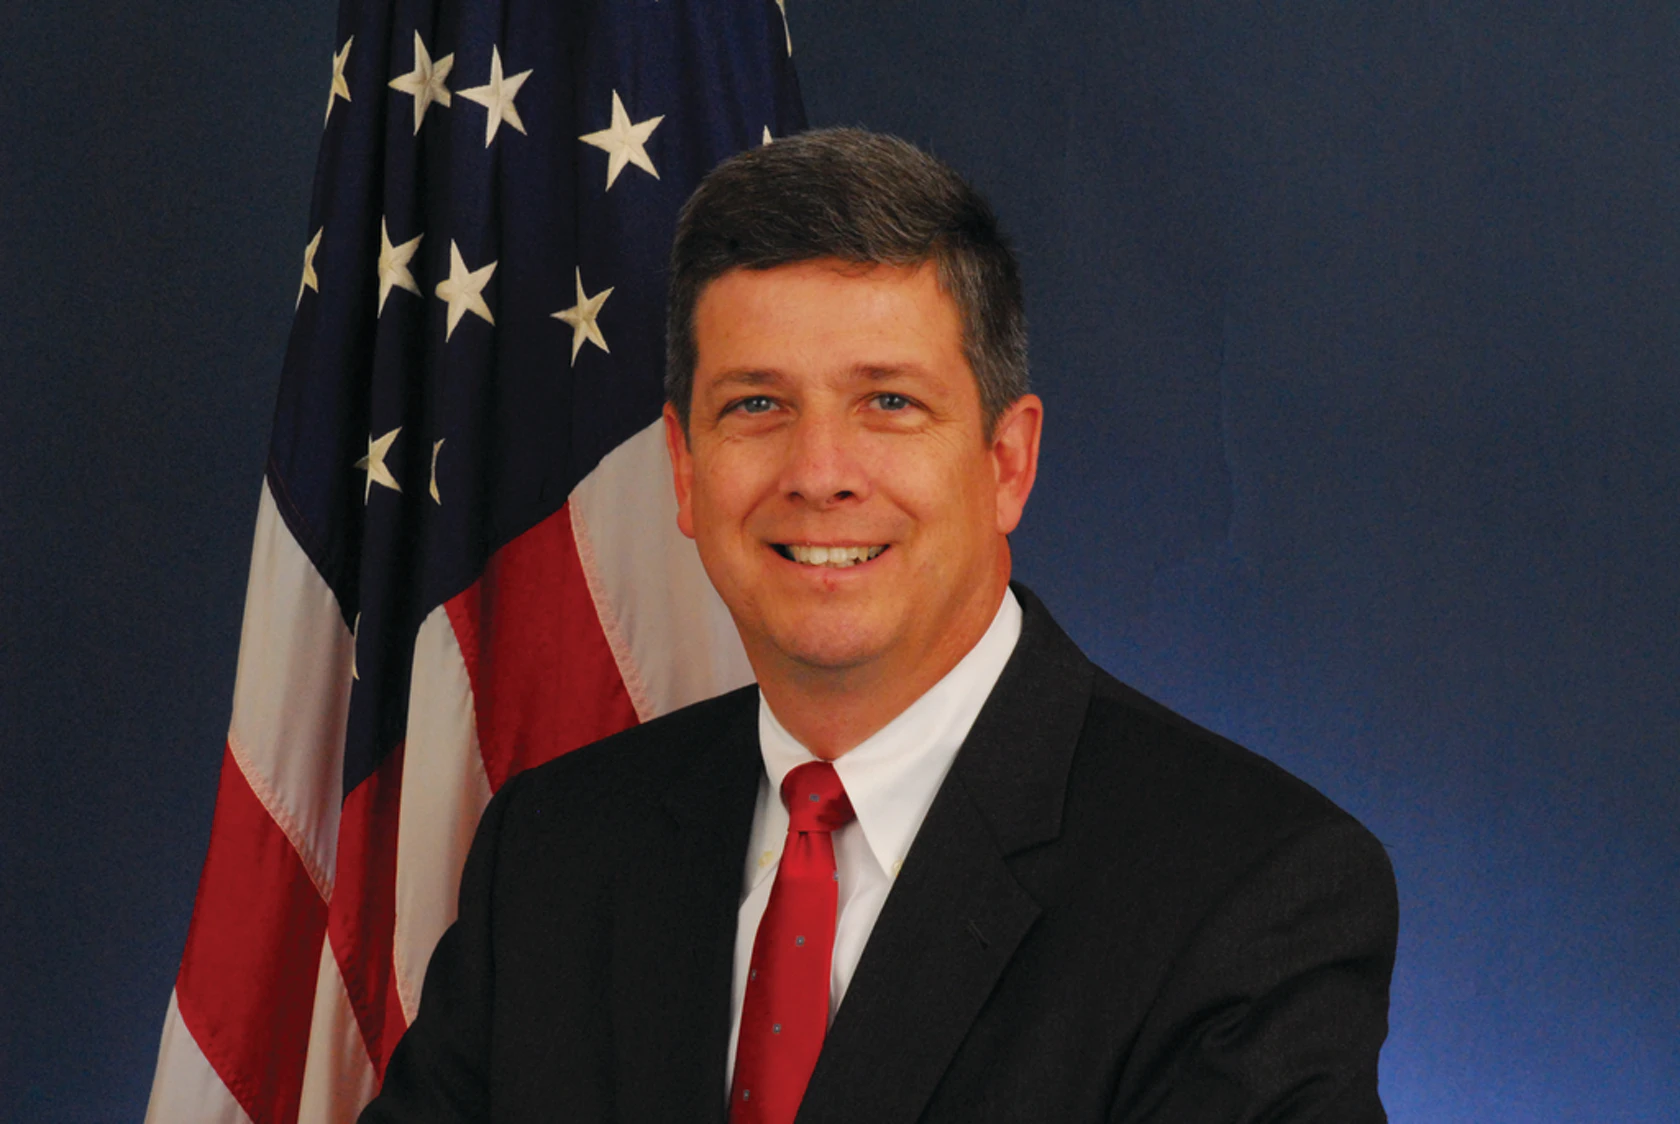 U.S. Department of Transportation Appoints Port Envoy to Address Supply Chain Disruptions